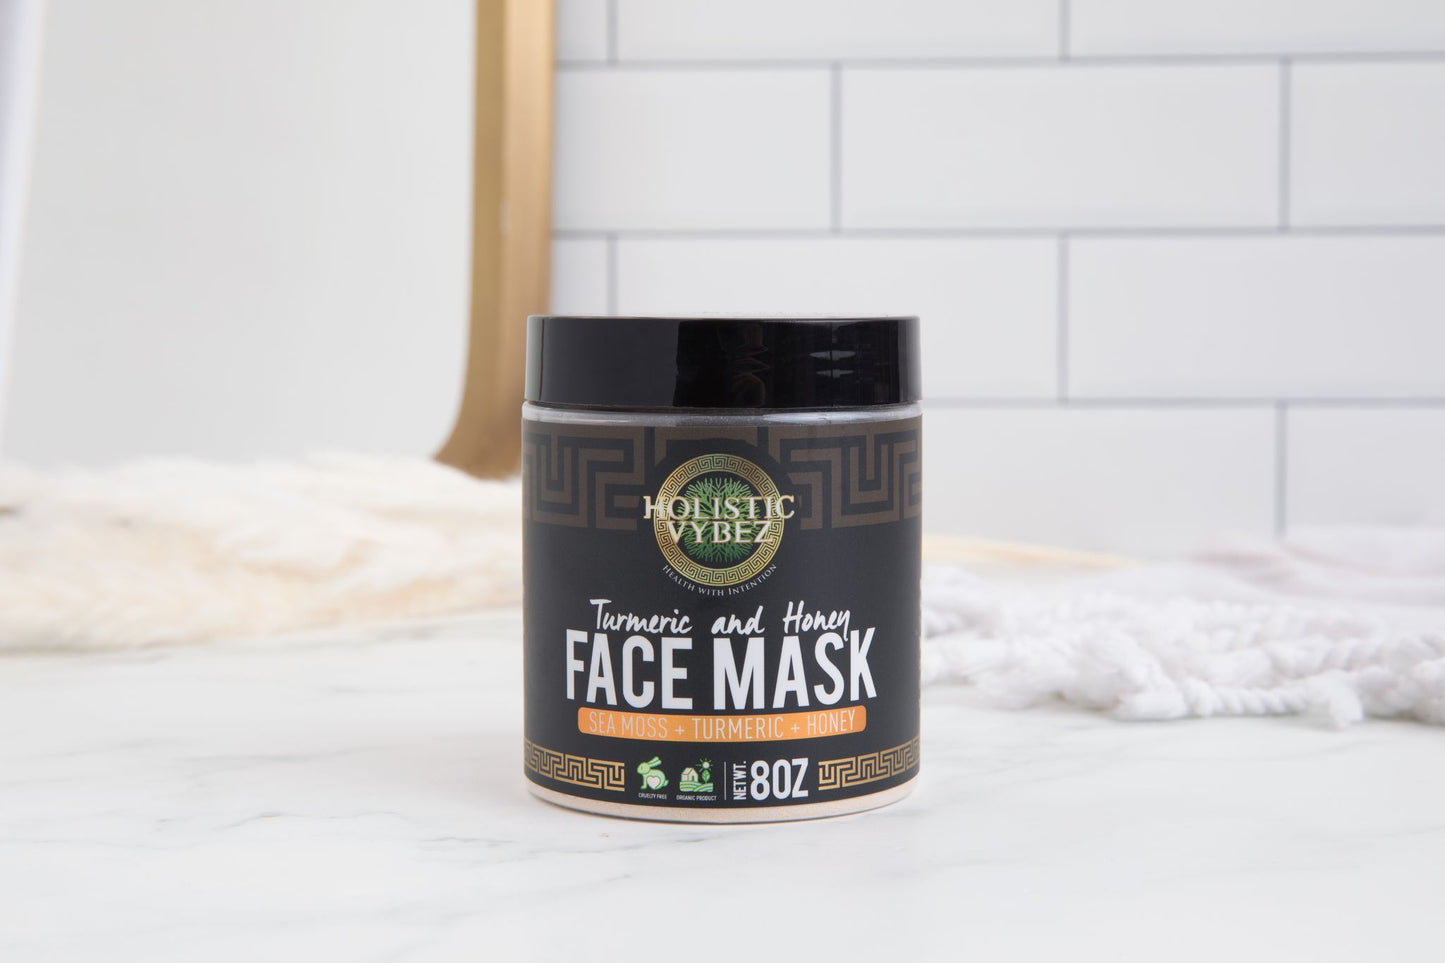 FACE MASK